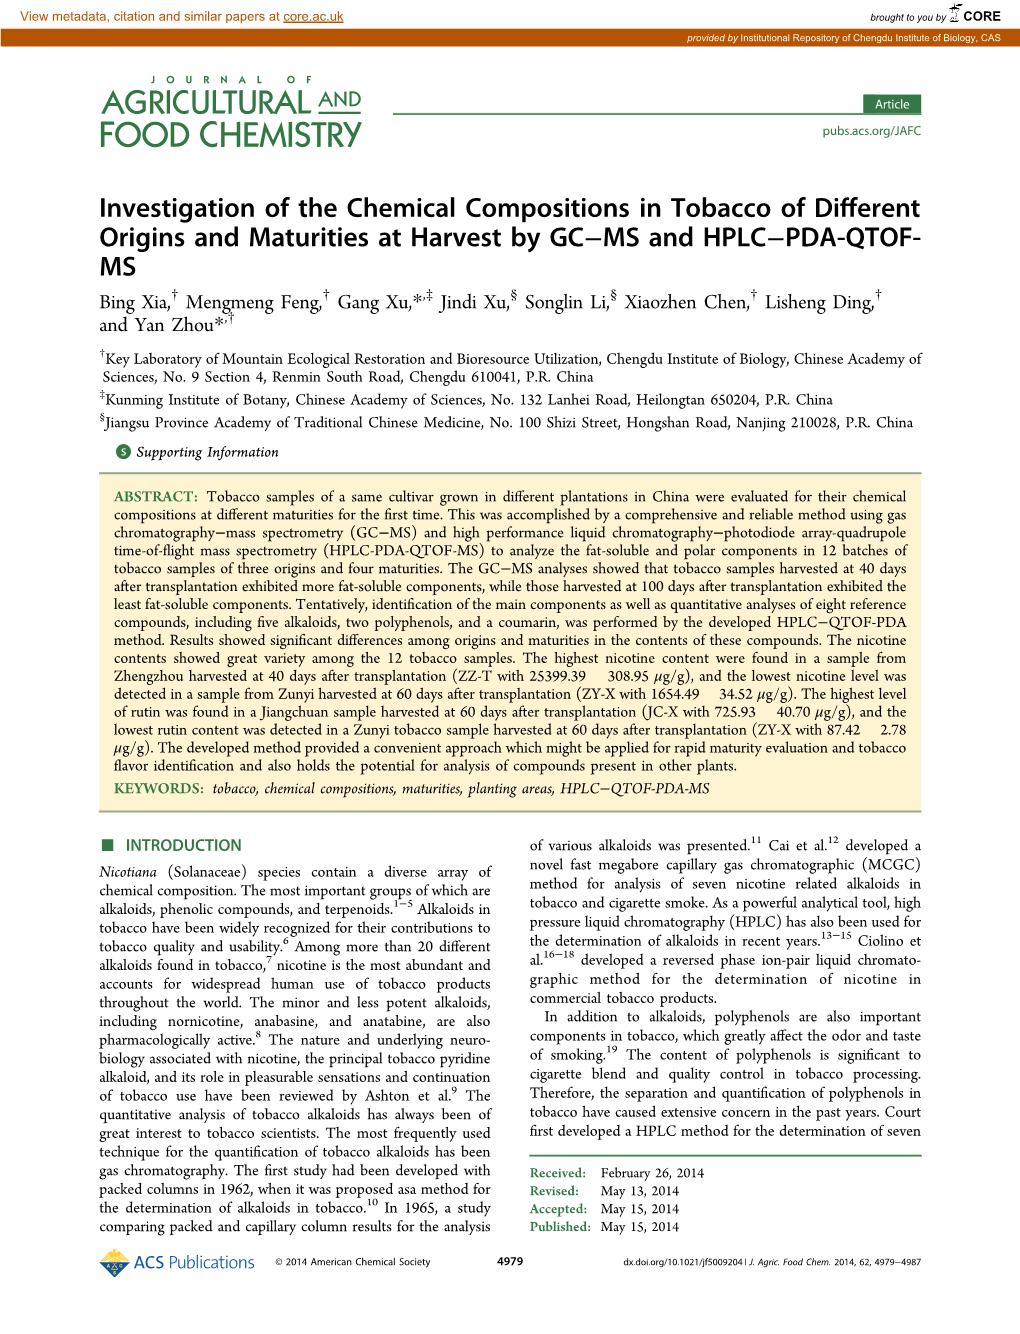 Investigation of the Chemical Compositions in Tobacco of Different Origins and Maturities at Harvest by GCMS and HPLCPDA-QTOF-MS